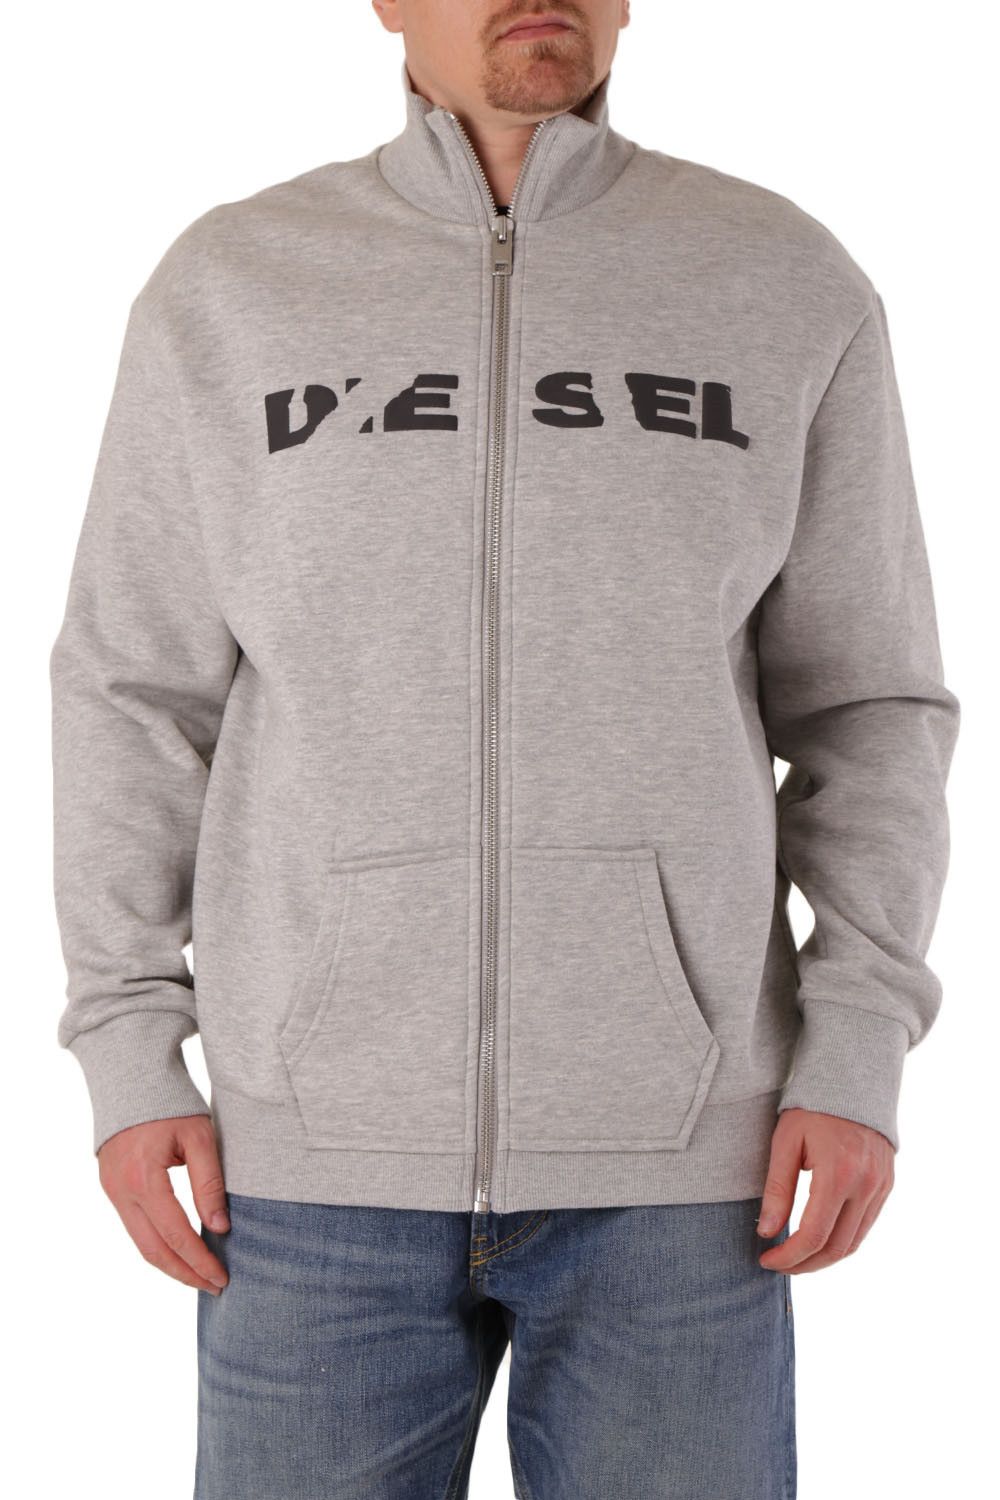 Brand: Diesel Gender: Men Type: Sweatshirts Season: Fall/Winter  PRODUCT DETAIL • Color: grey • Fastening: with zip • Sleeves: long • Pockets: front pockets  COMPOSITION AND MATERIAL • Composition: -56% cotton  •  Washing: machine wash at 30°